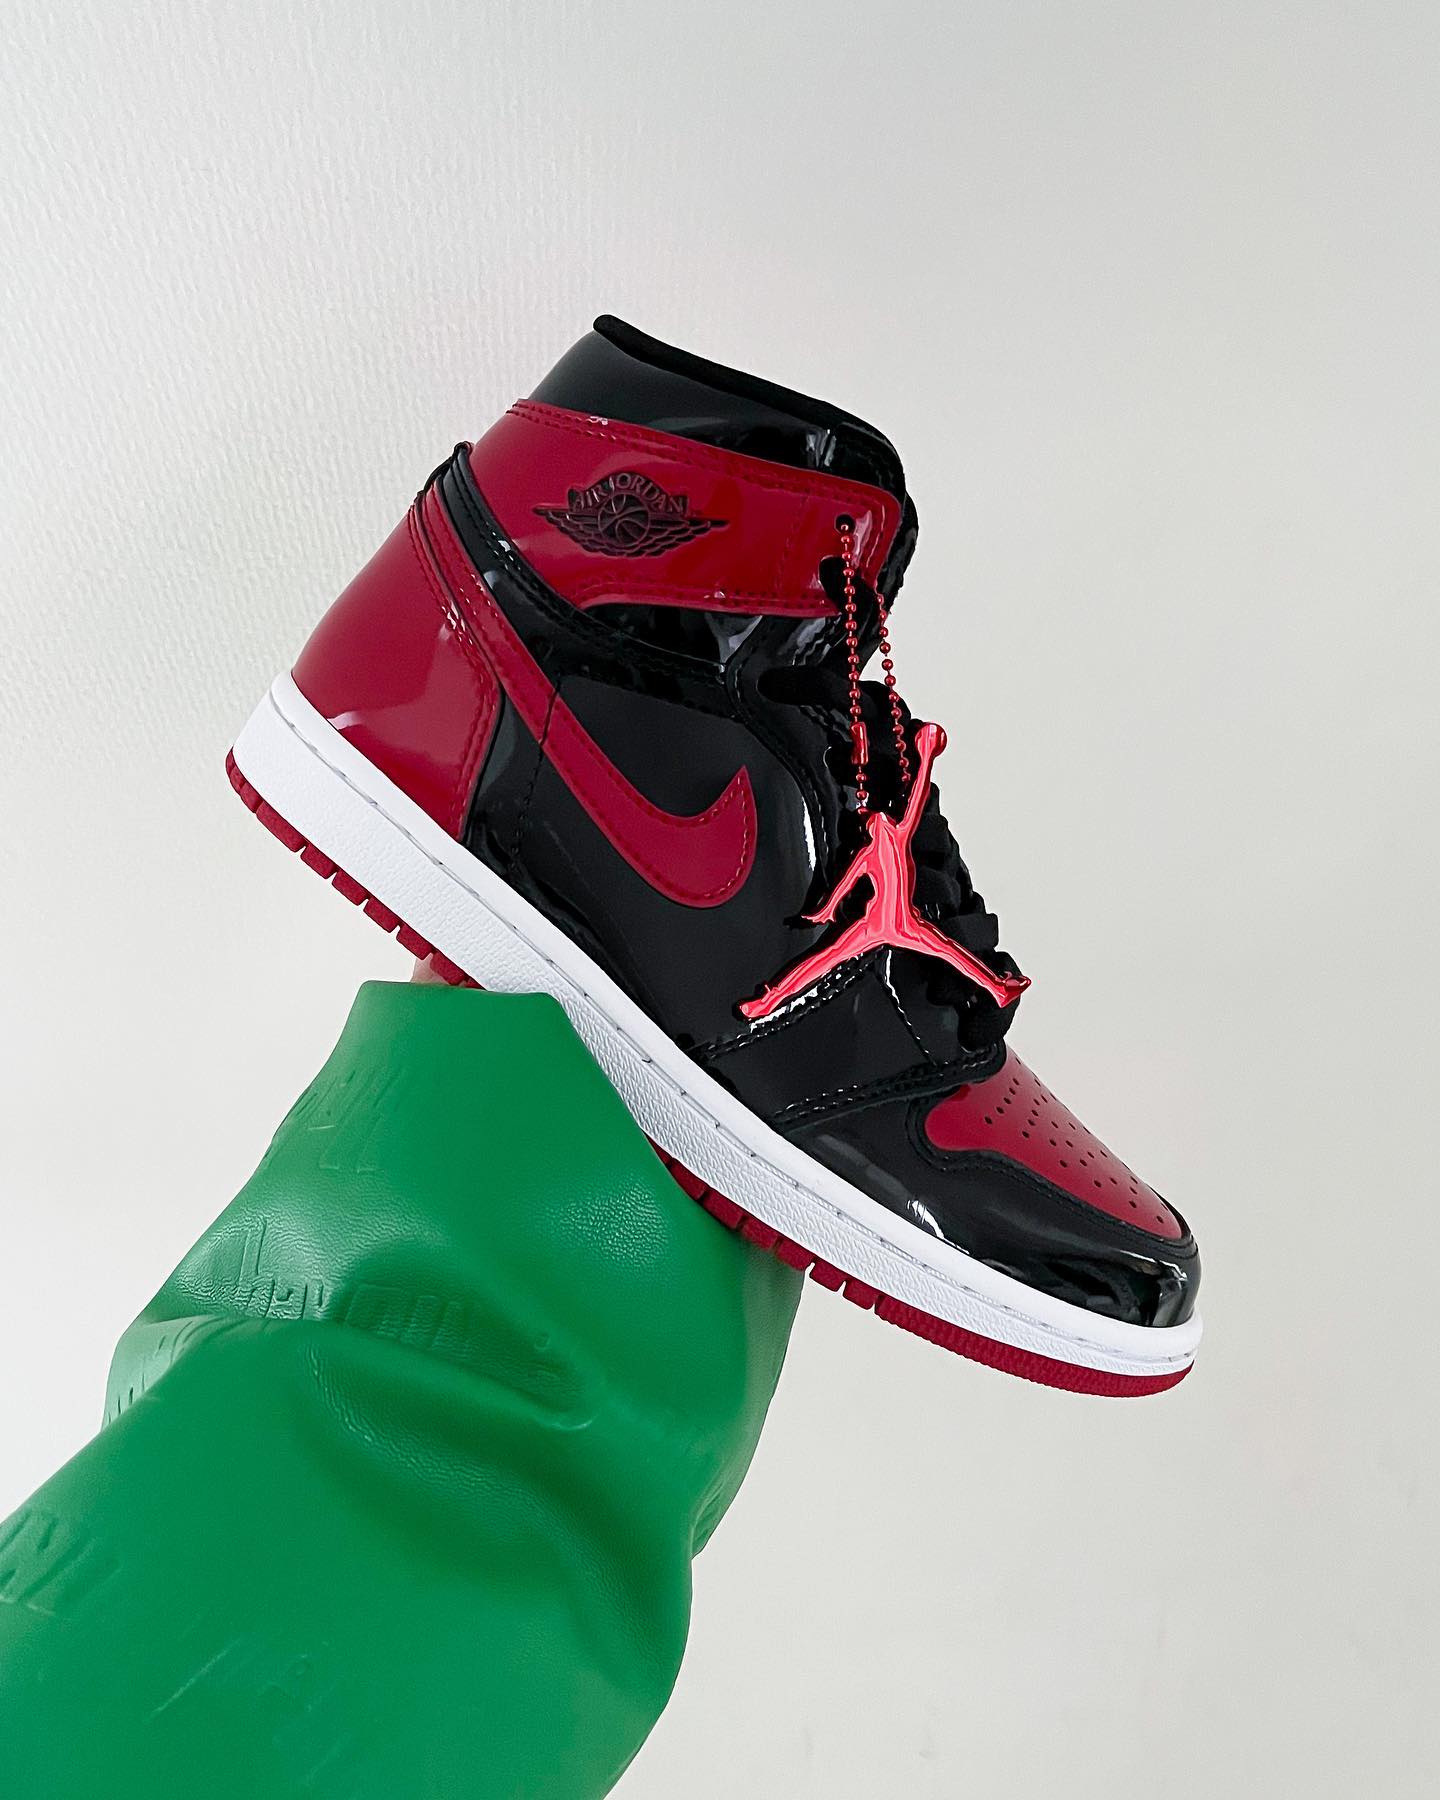 Nike Air Jordan 1 AJ1 hot sale stitching color High -help couple casual shoes sneakers